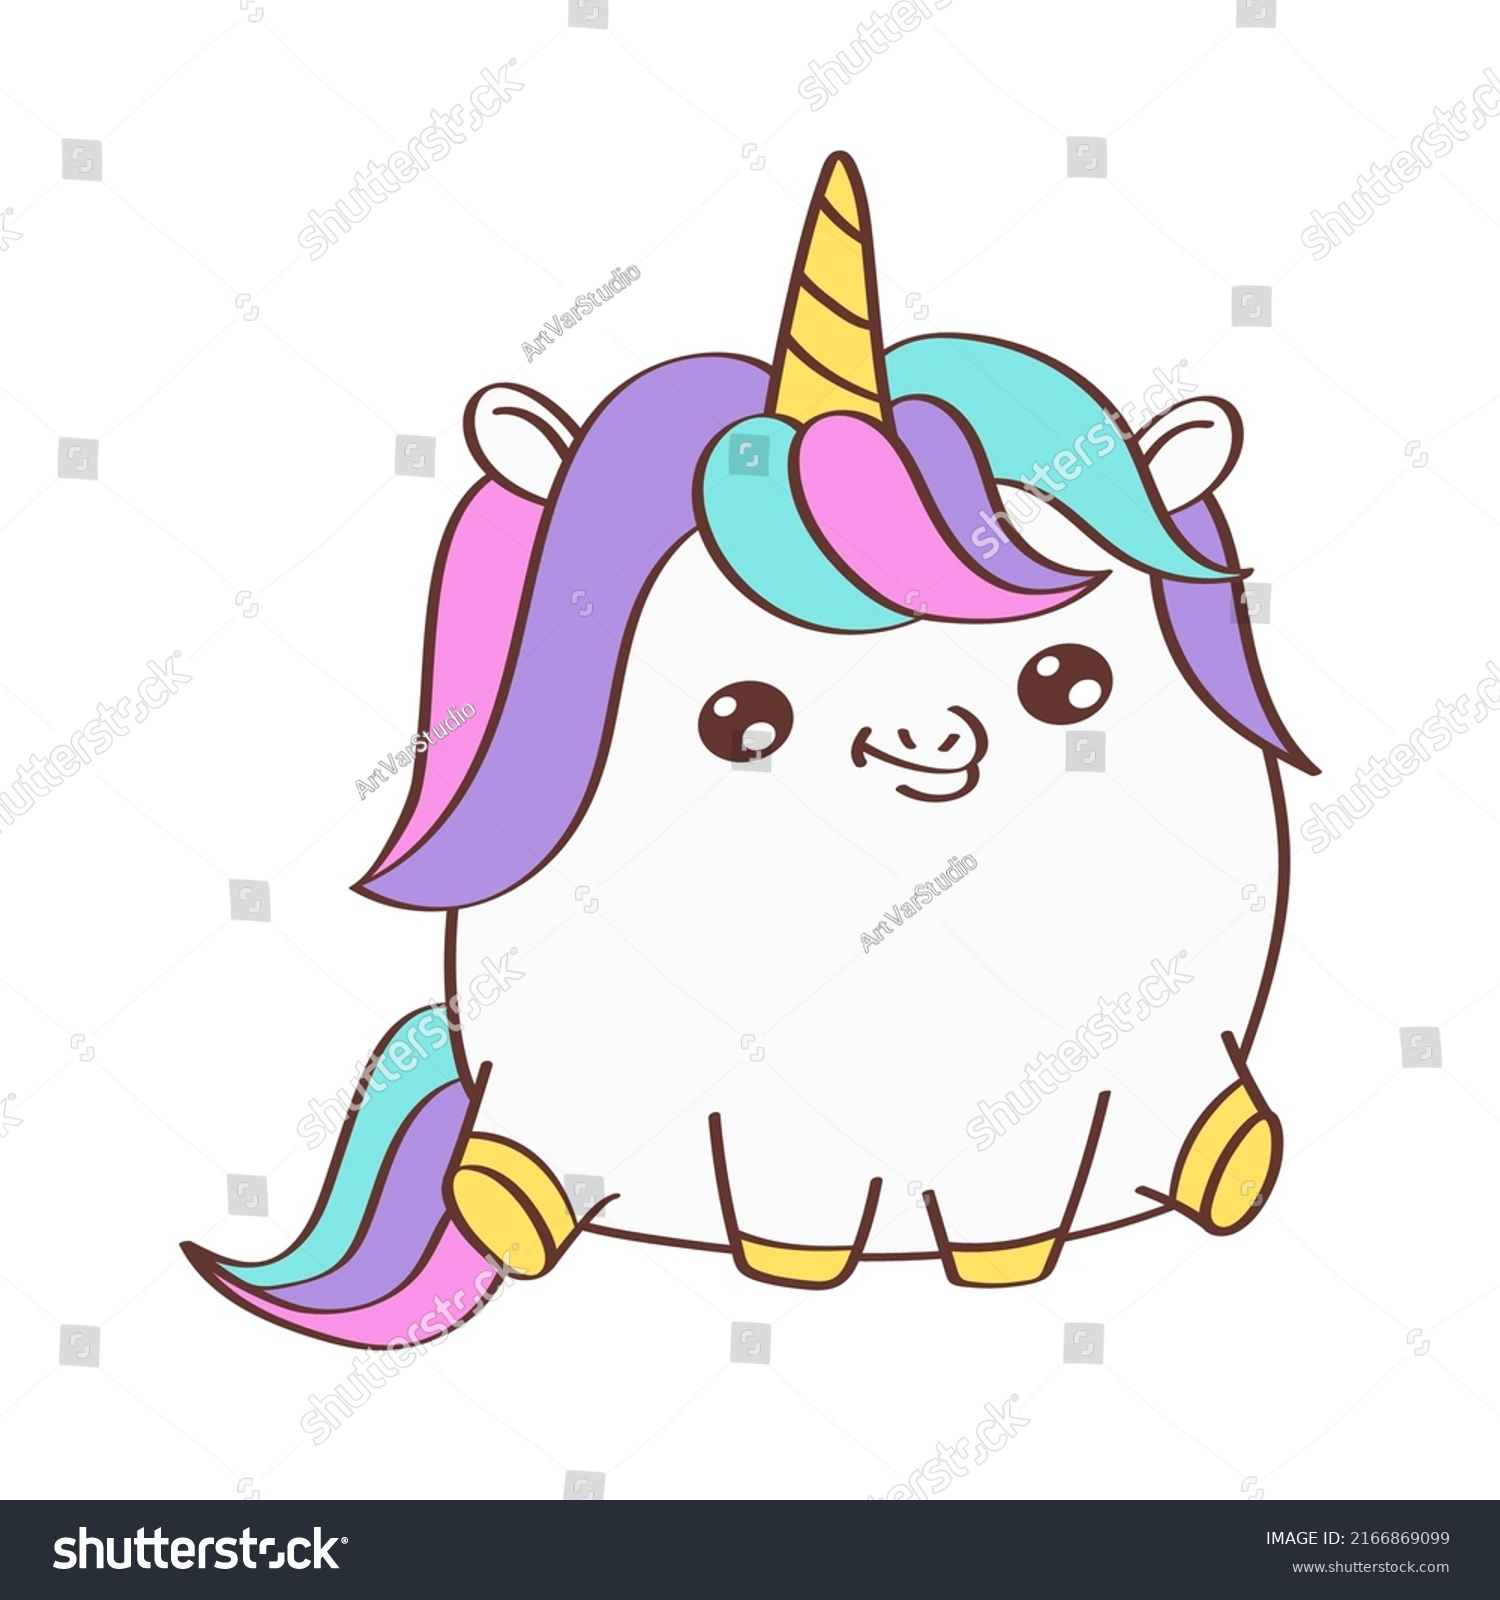 SVG of Cute Clipart Unicorn Plump Illustration in Cartoon Style. Cartoon Clip Art Unicorn Fat. Vector Illustration of an Animal for Stickers, Baby Shower Invitation, Prints for Clothes.  svg